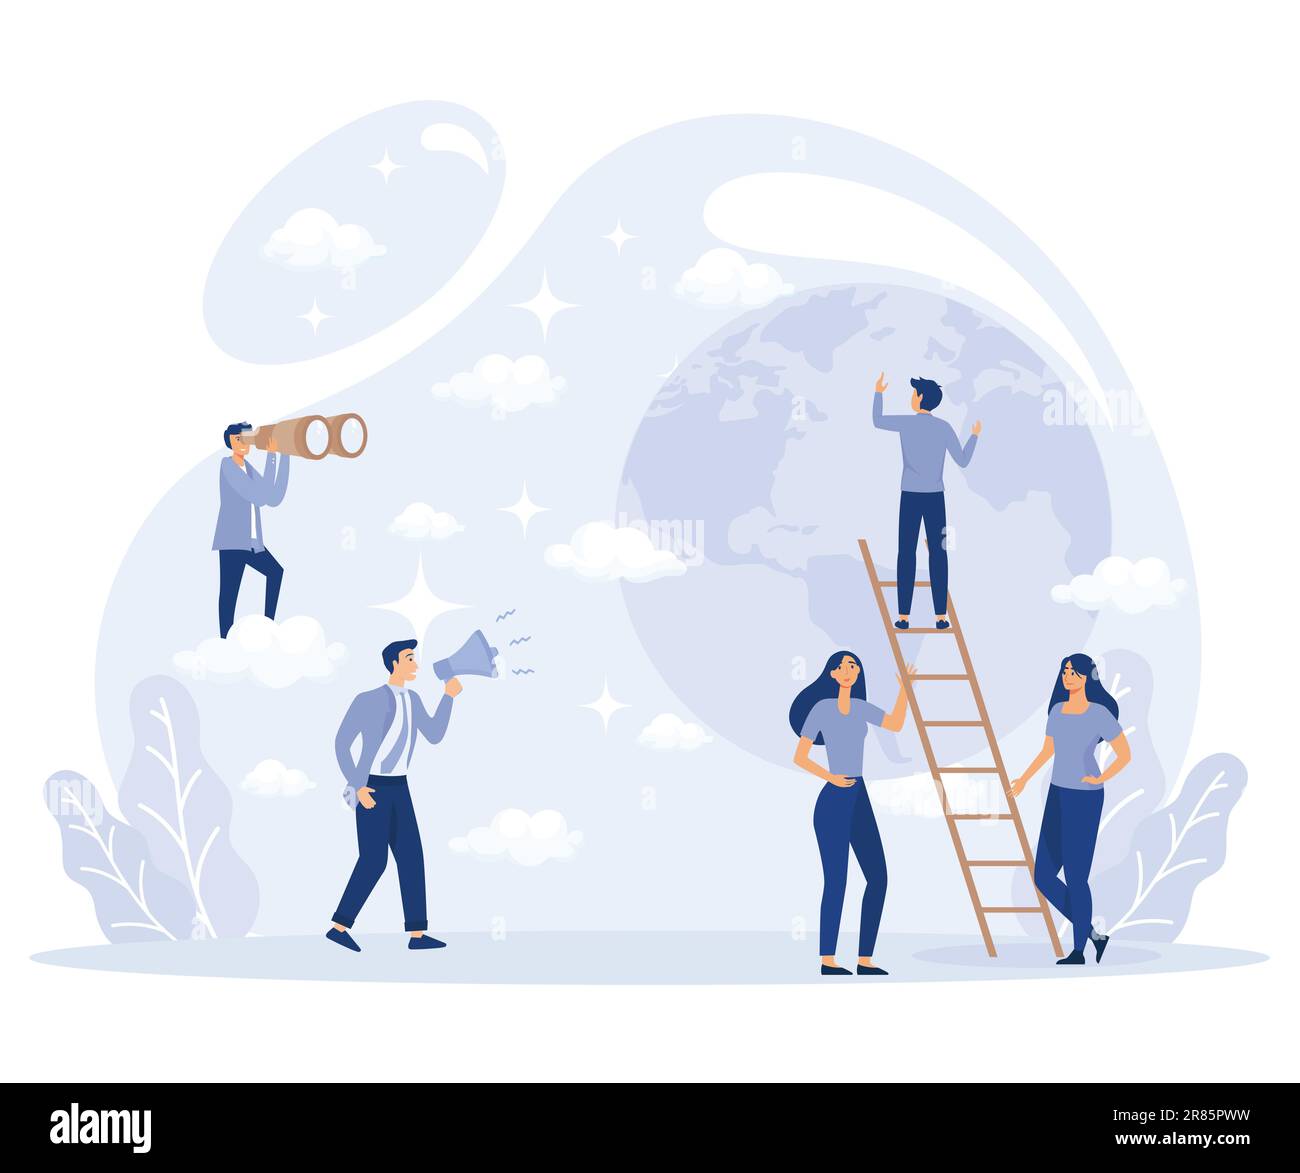 Man Climbing on Ladder, Taking Clouds away from World Globe, Getting to Top, Having Ambition, Career Growth, flat vector modern illustration Stock Vector